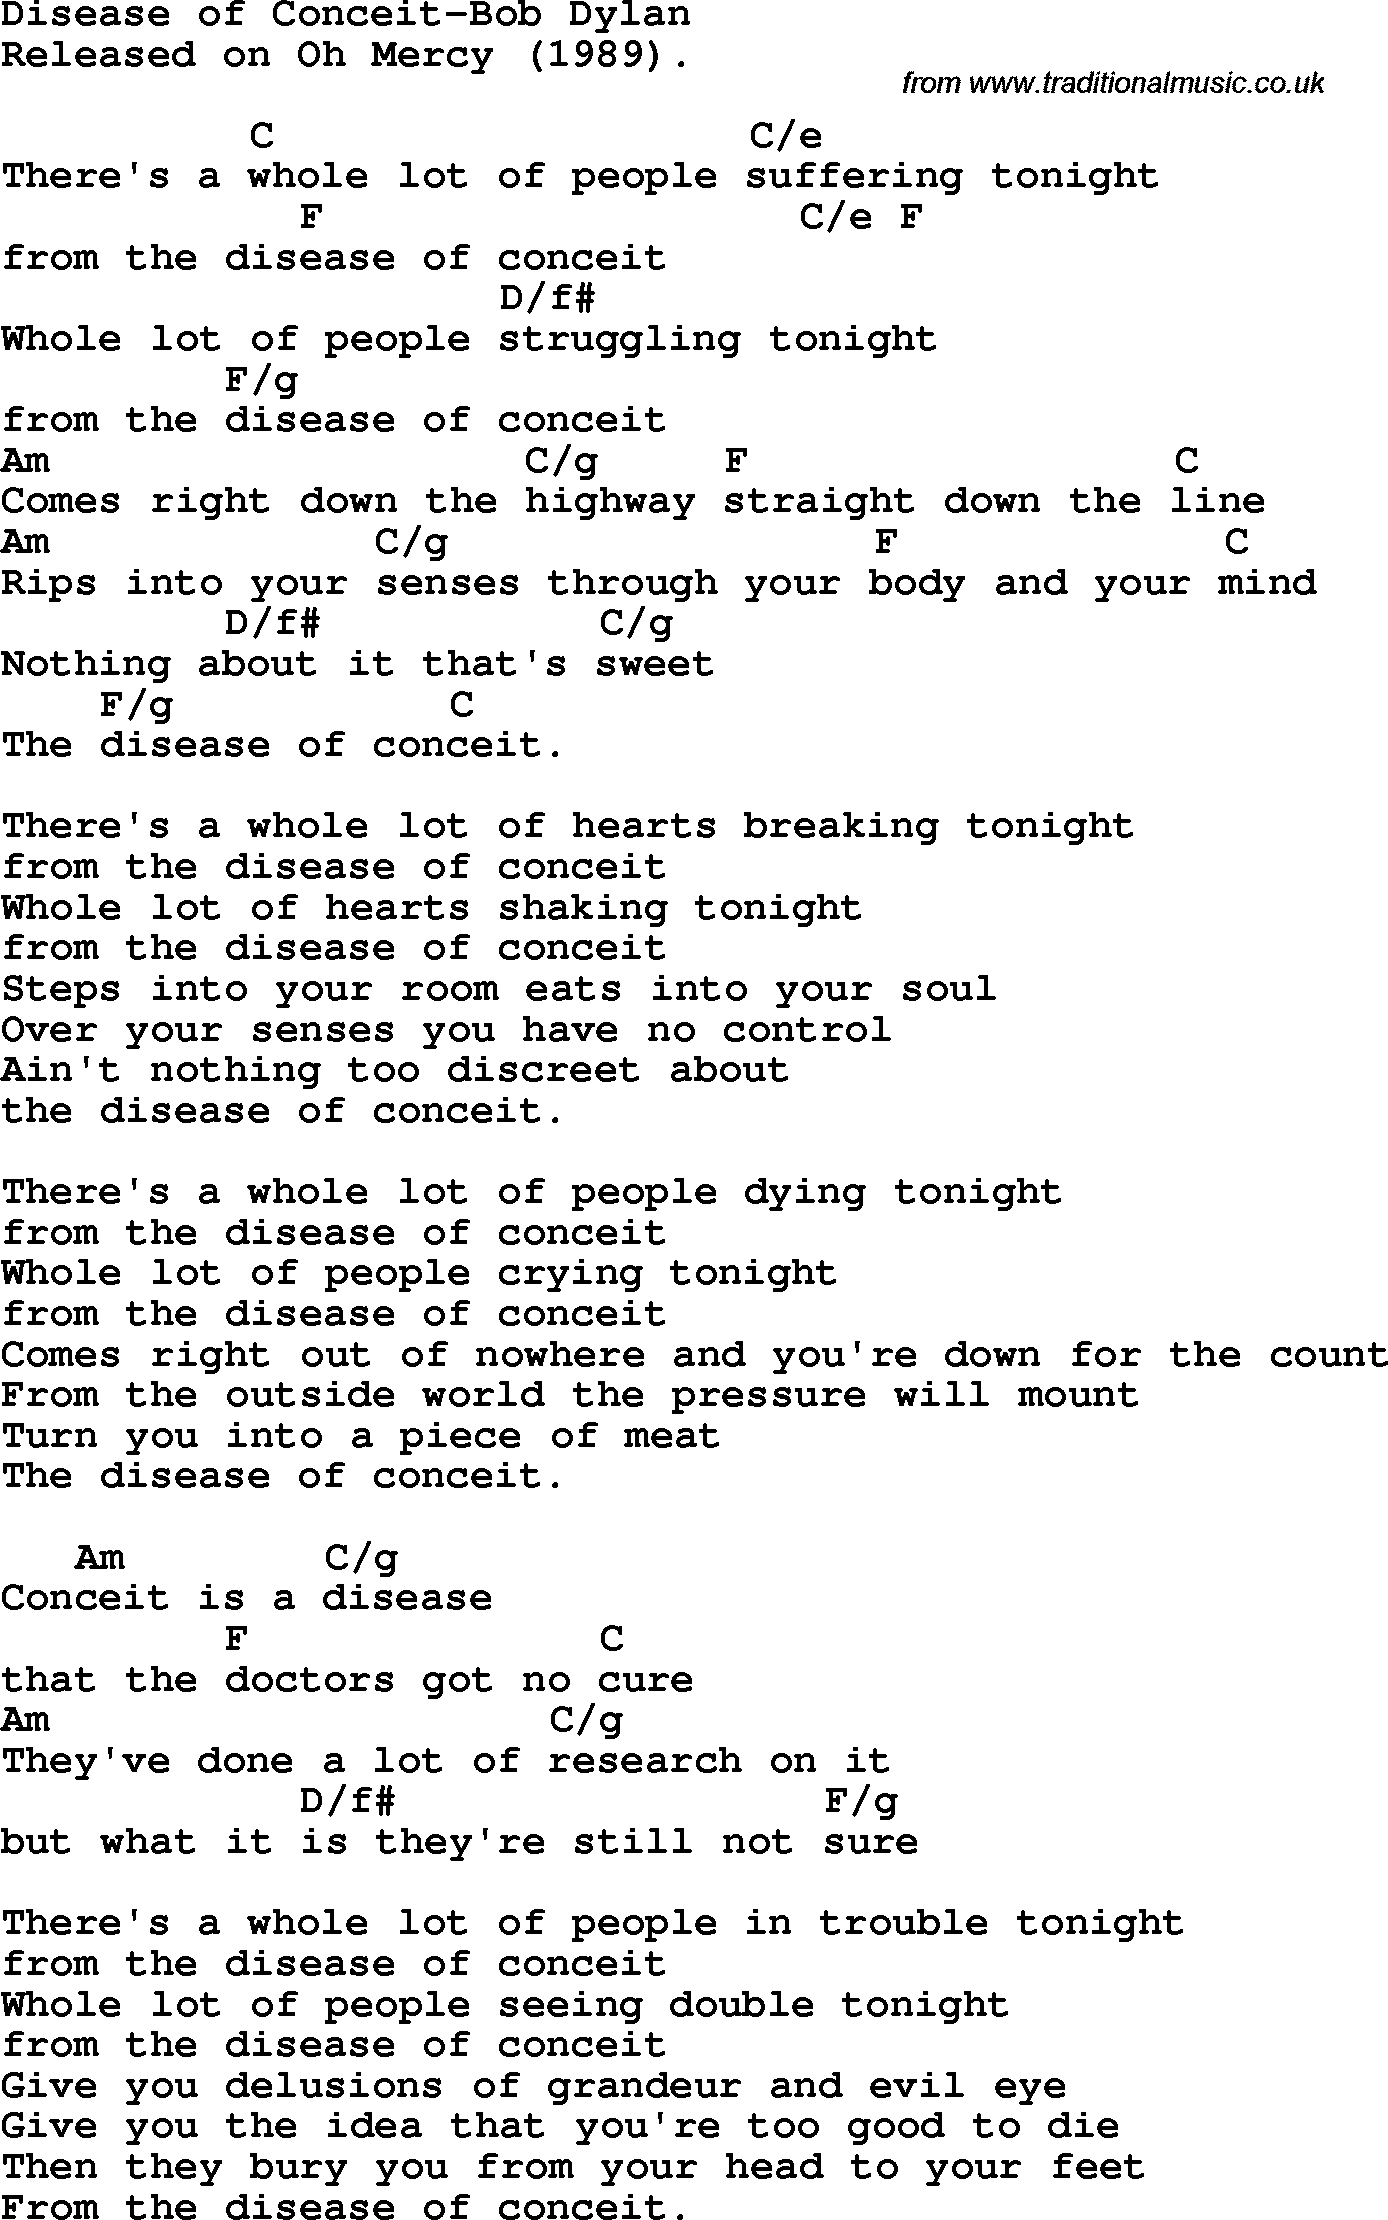 Protest Song Disease Of Conceit-Bob Dylan lyrics and chords